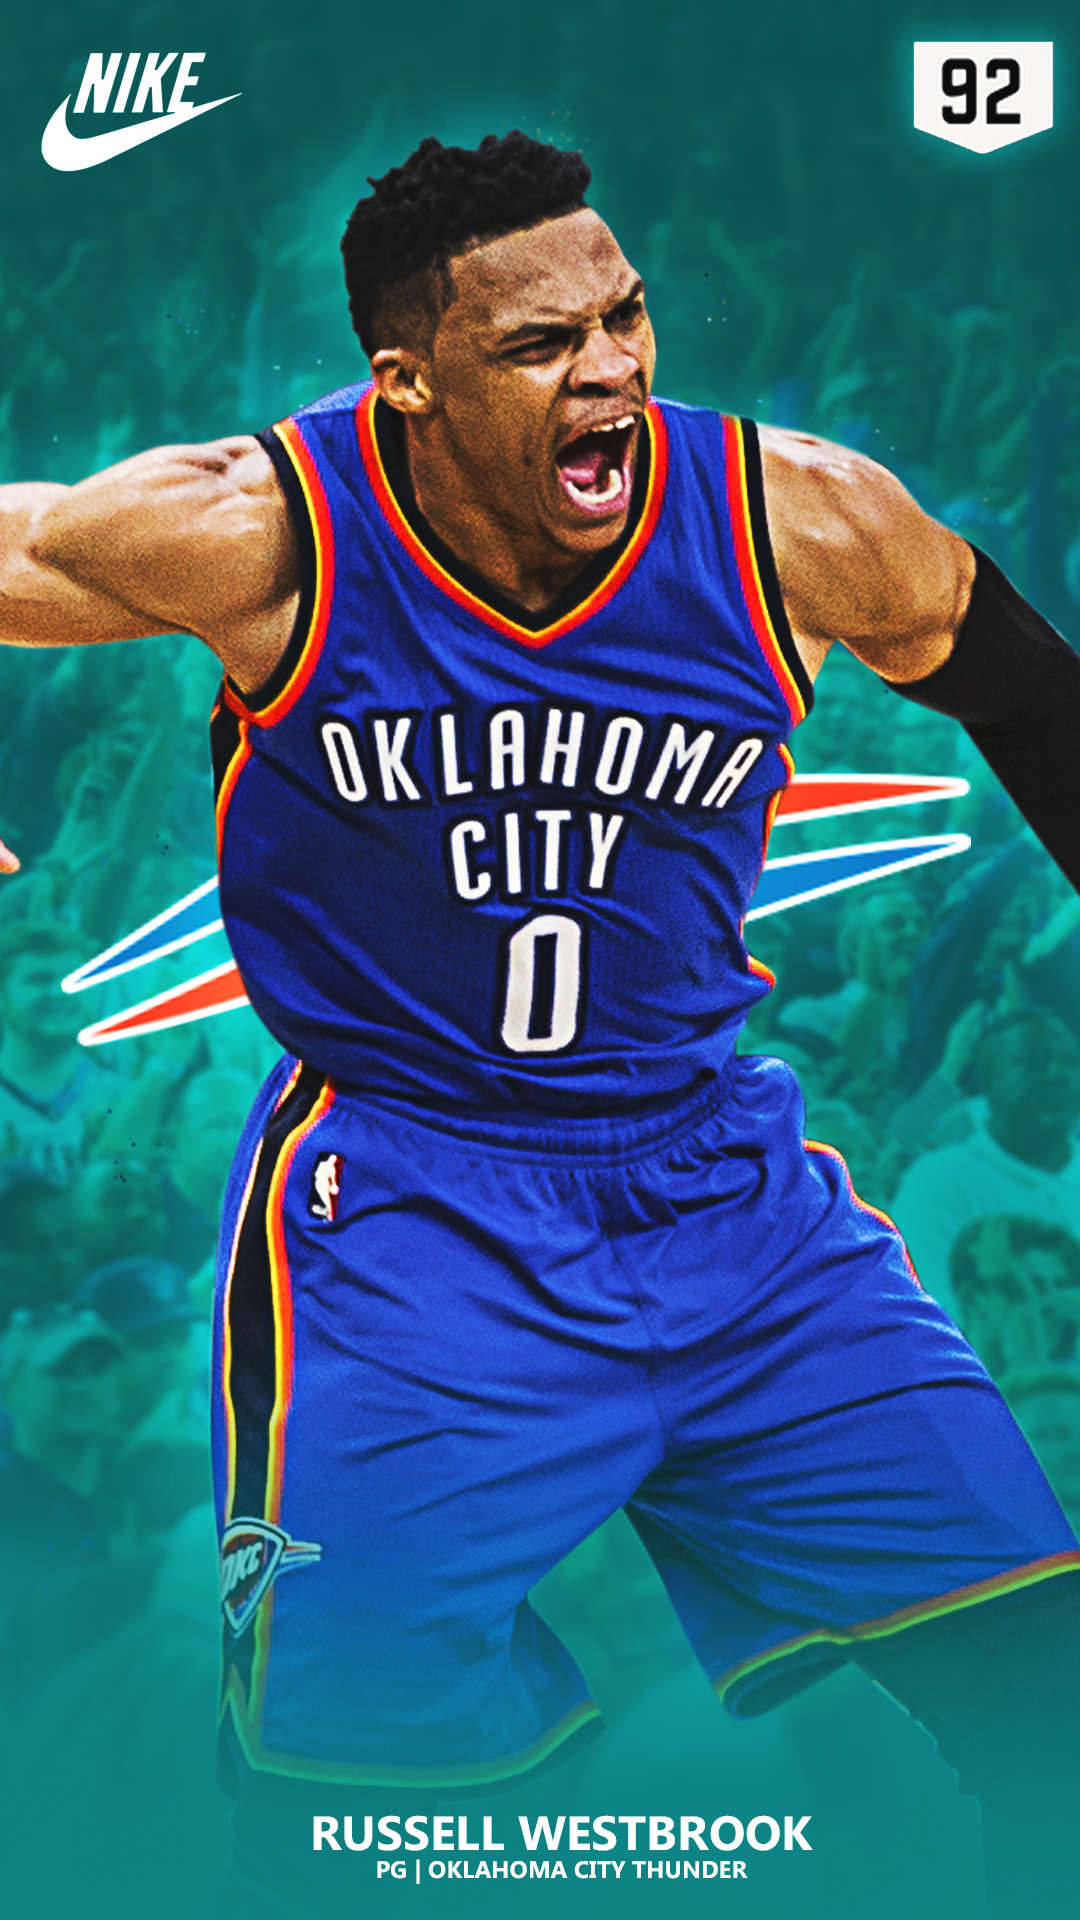 RUSSELL WESTBROOK WALLPAPER / RATING CARD. Russell